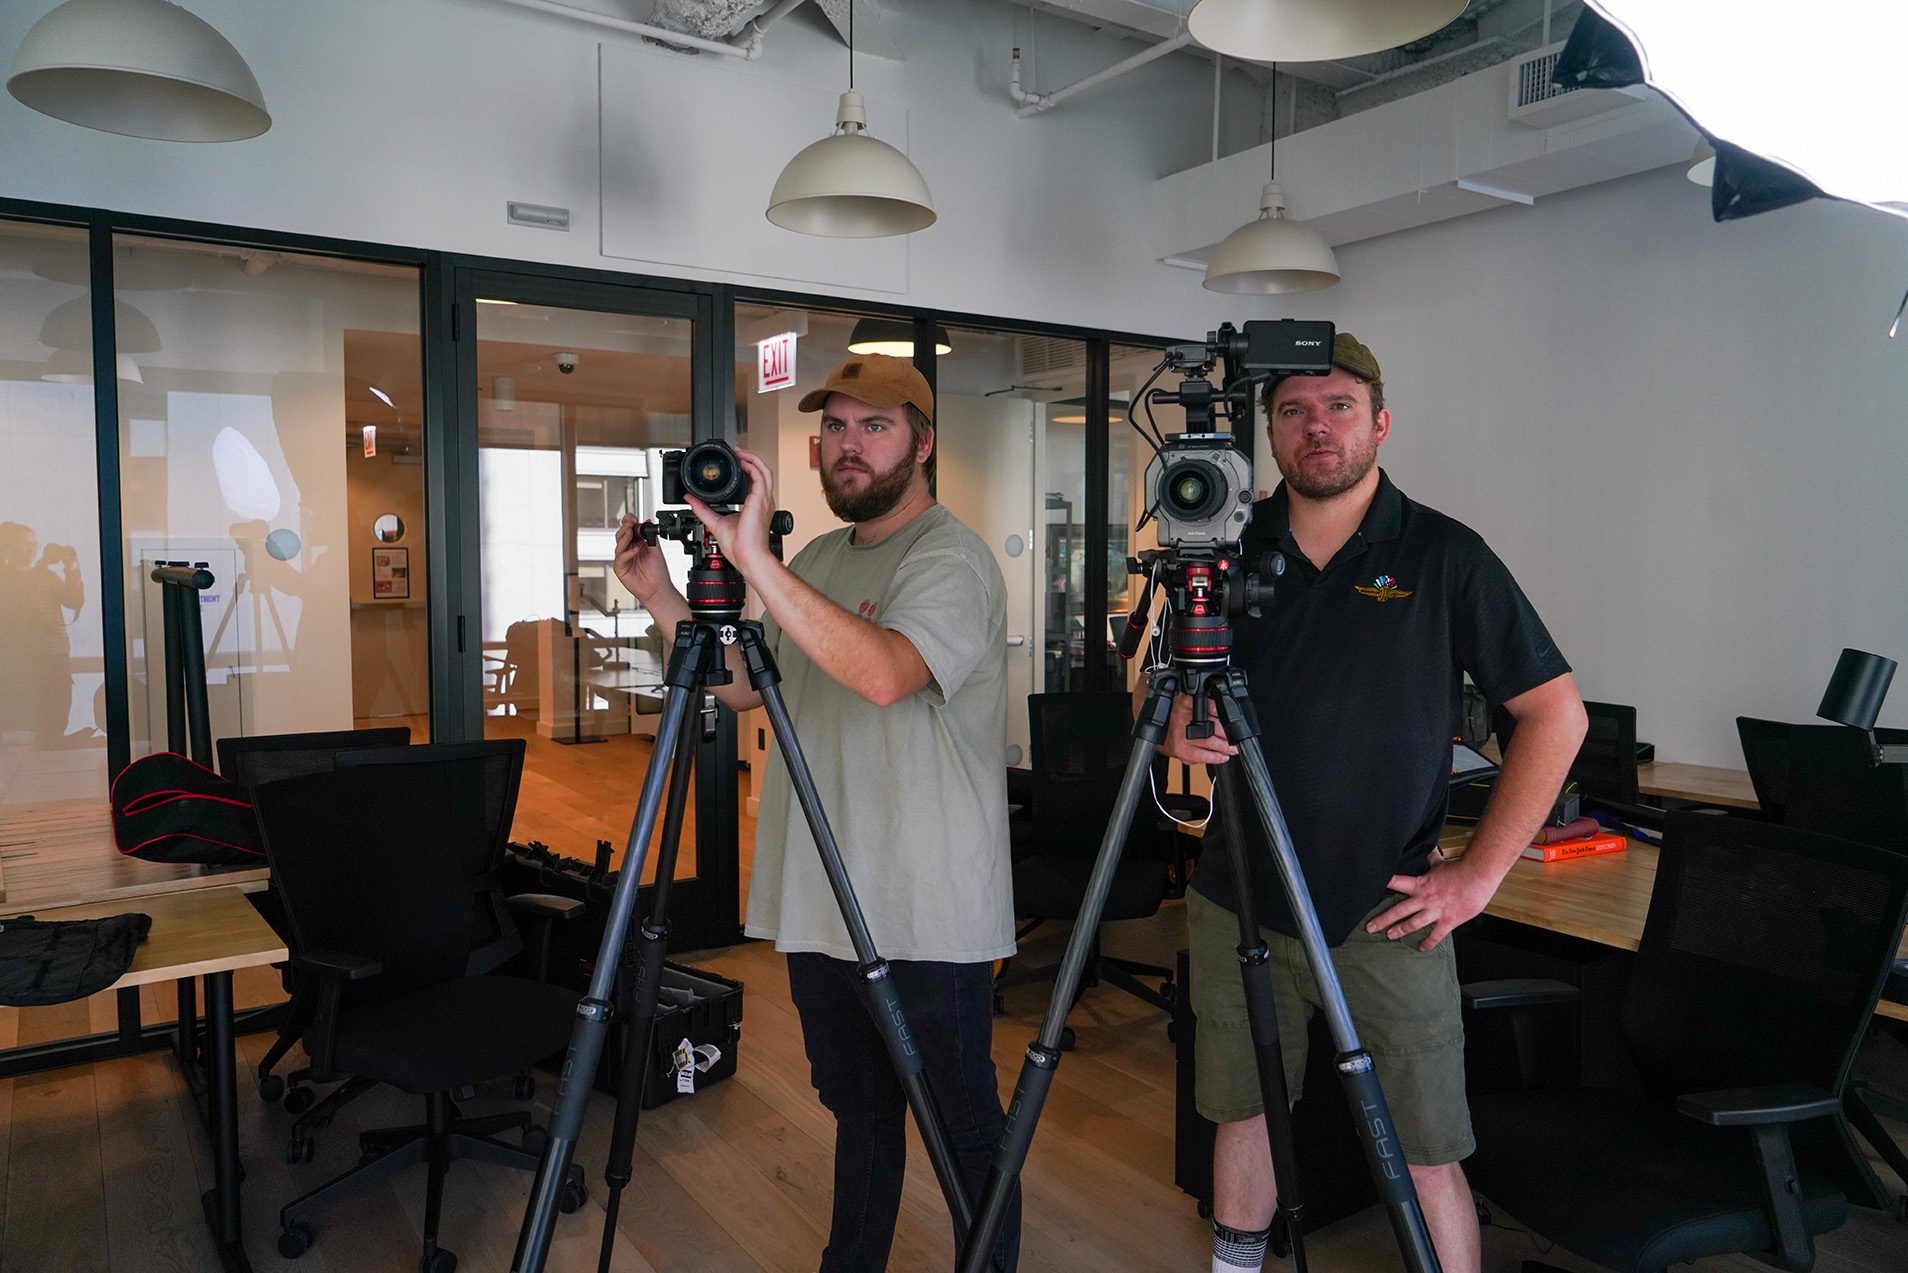 What You Need To Know Before Hiring a Video Production Company